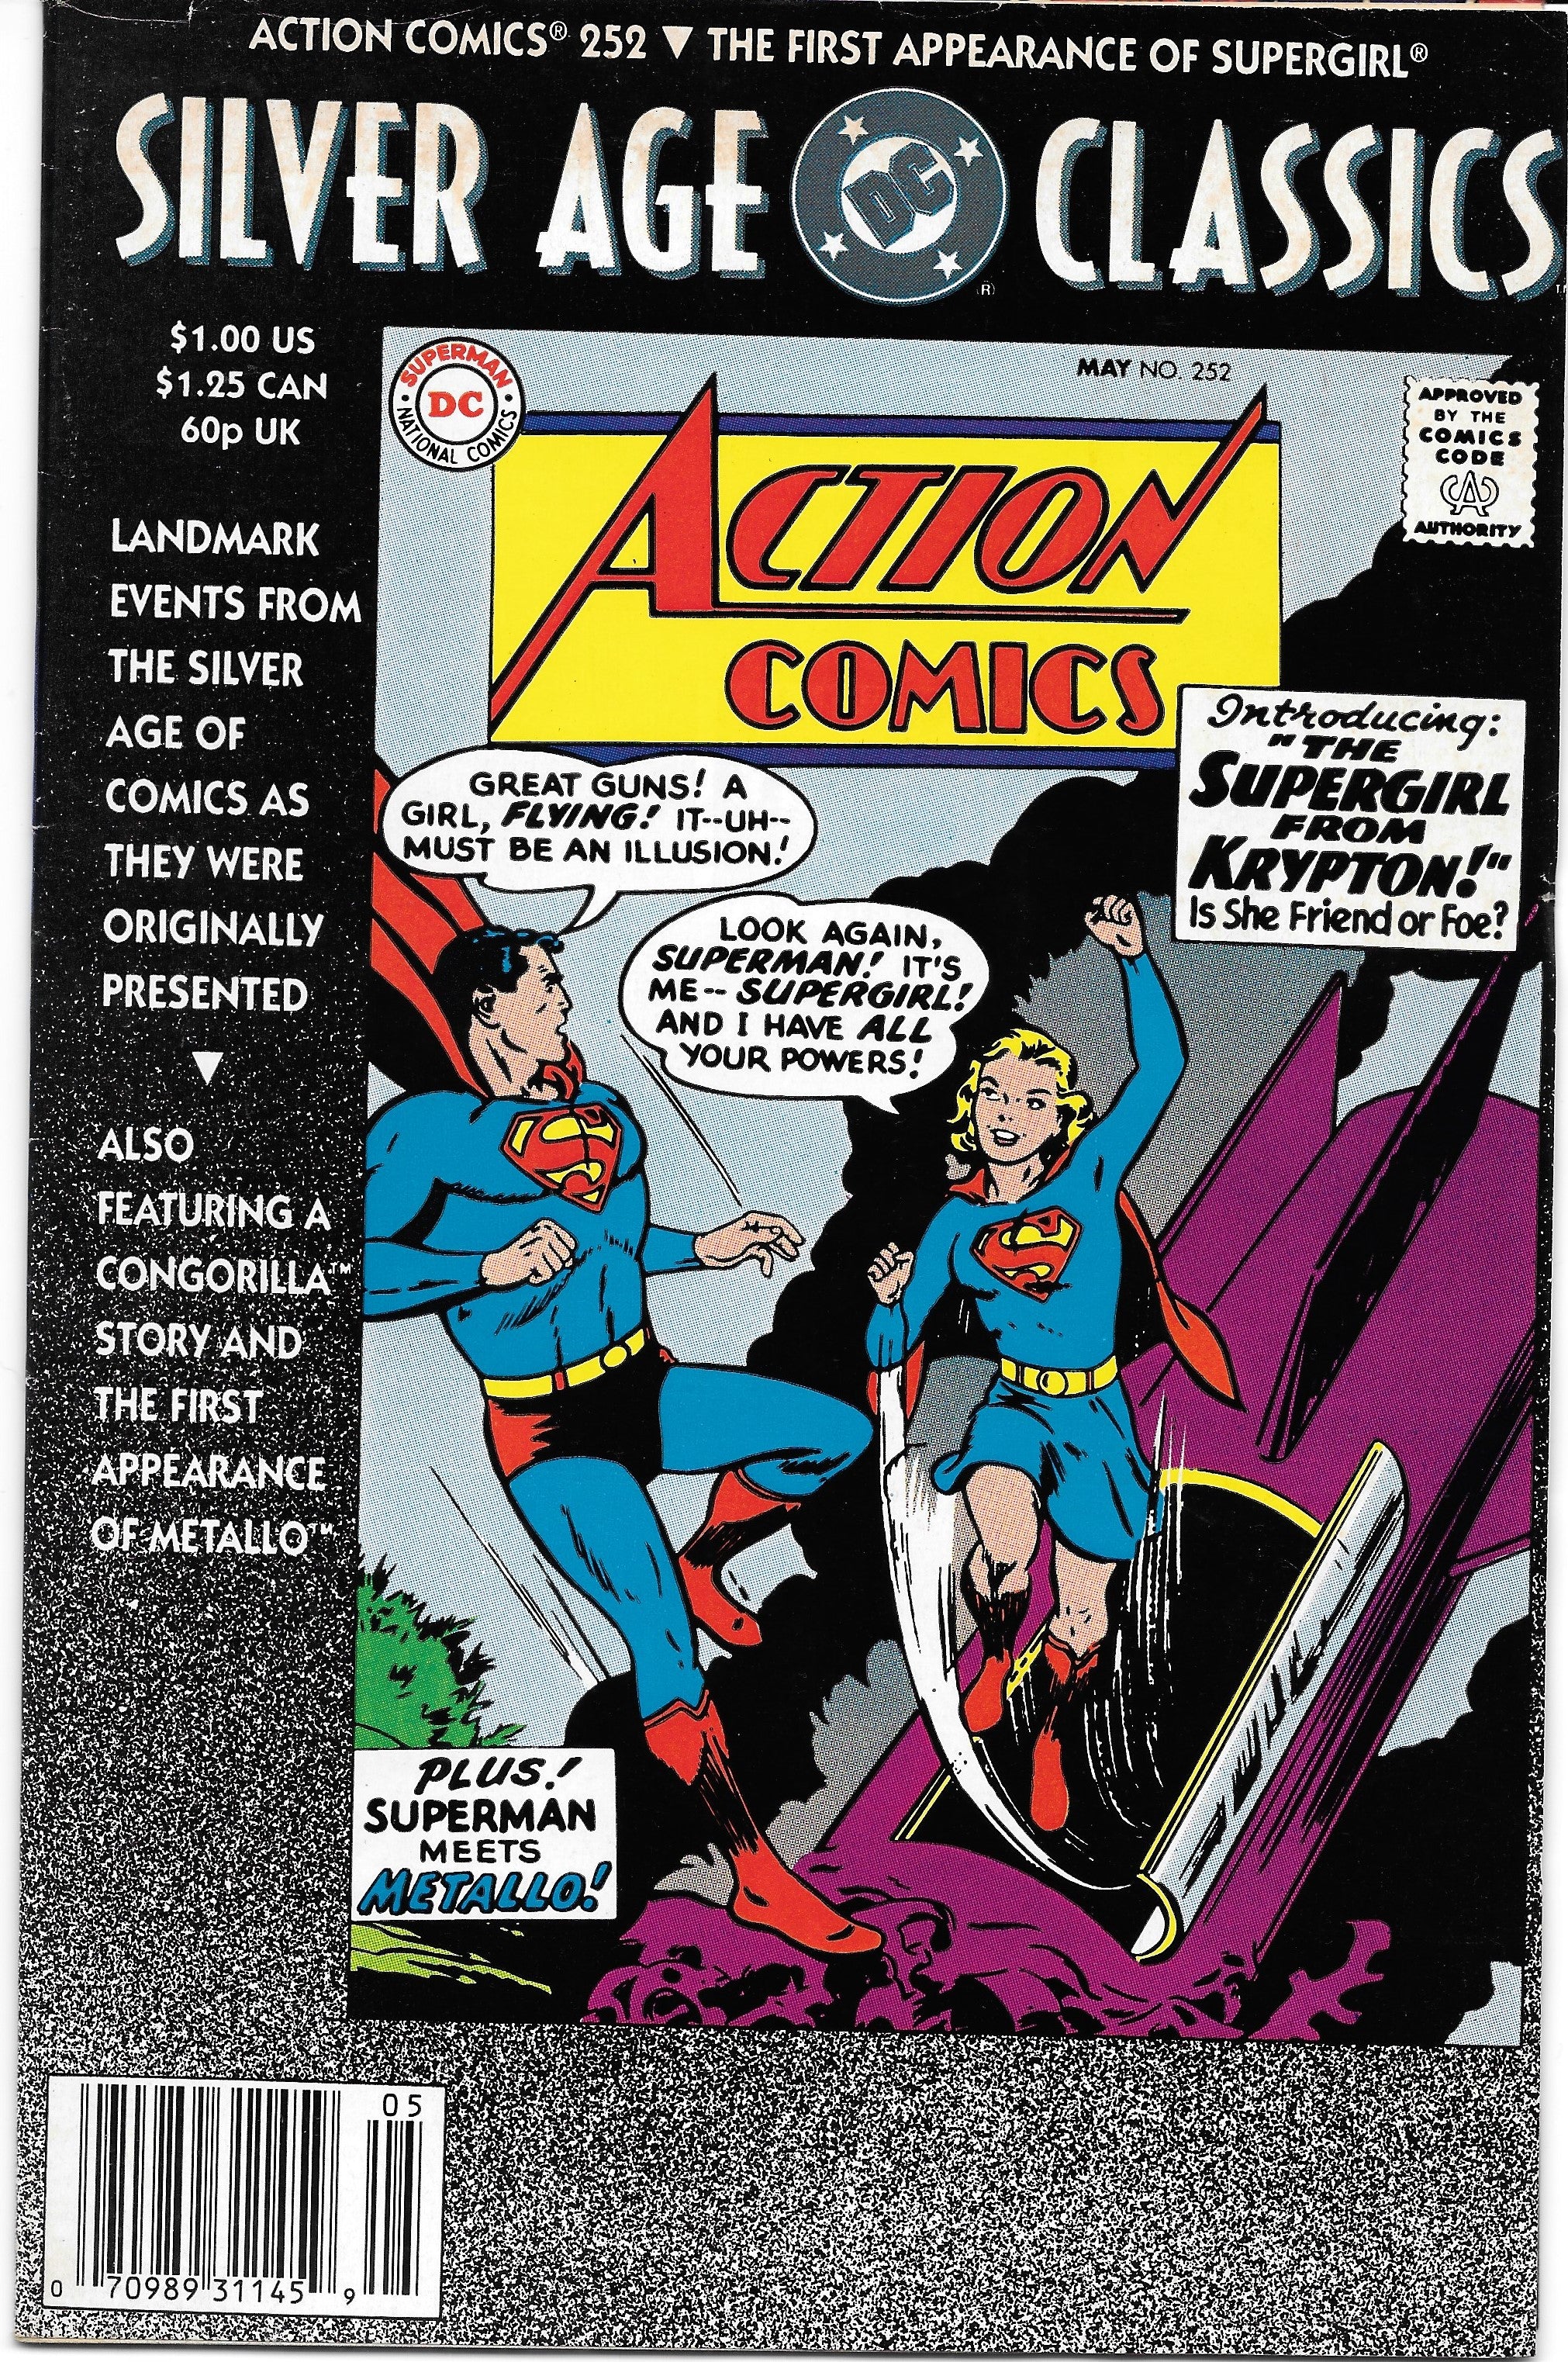 Photo of DC Silver Age Classics (1992) Issue 252 - Fine Comic sold by Stronghold Collectibles